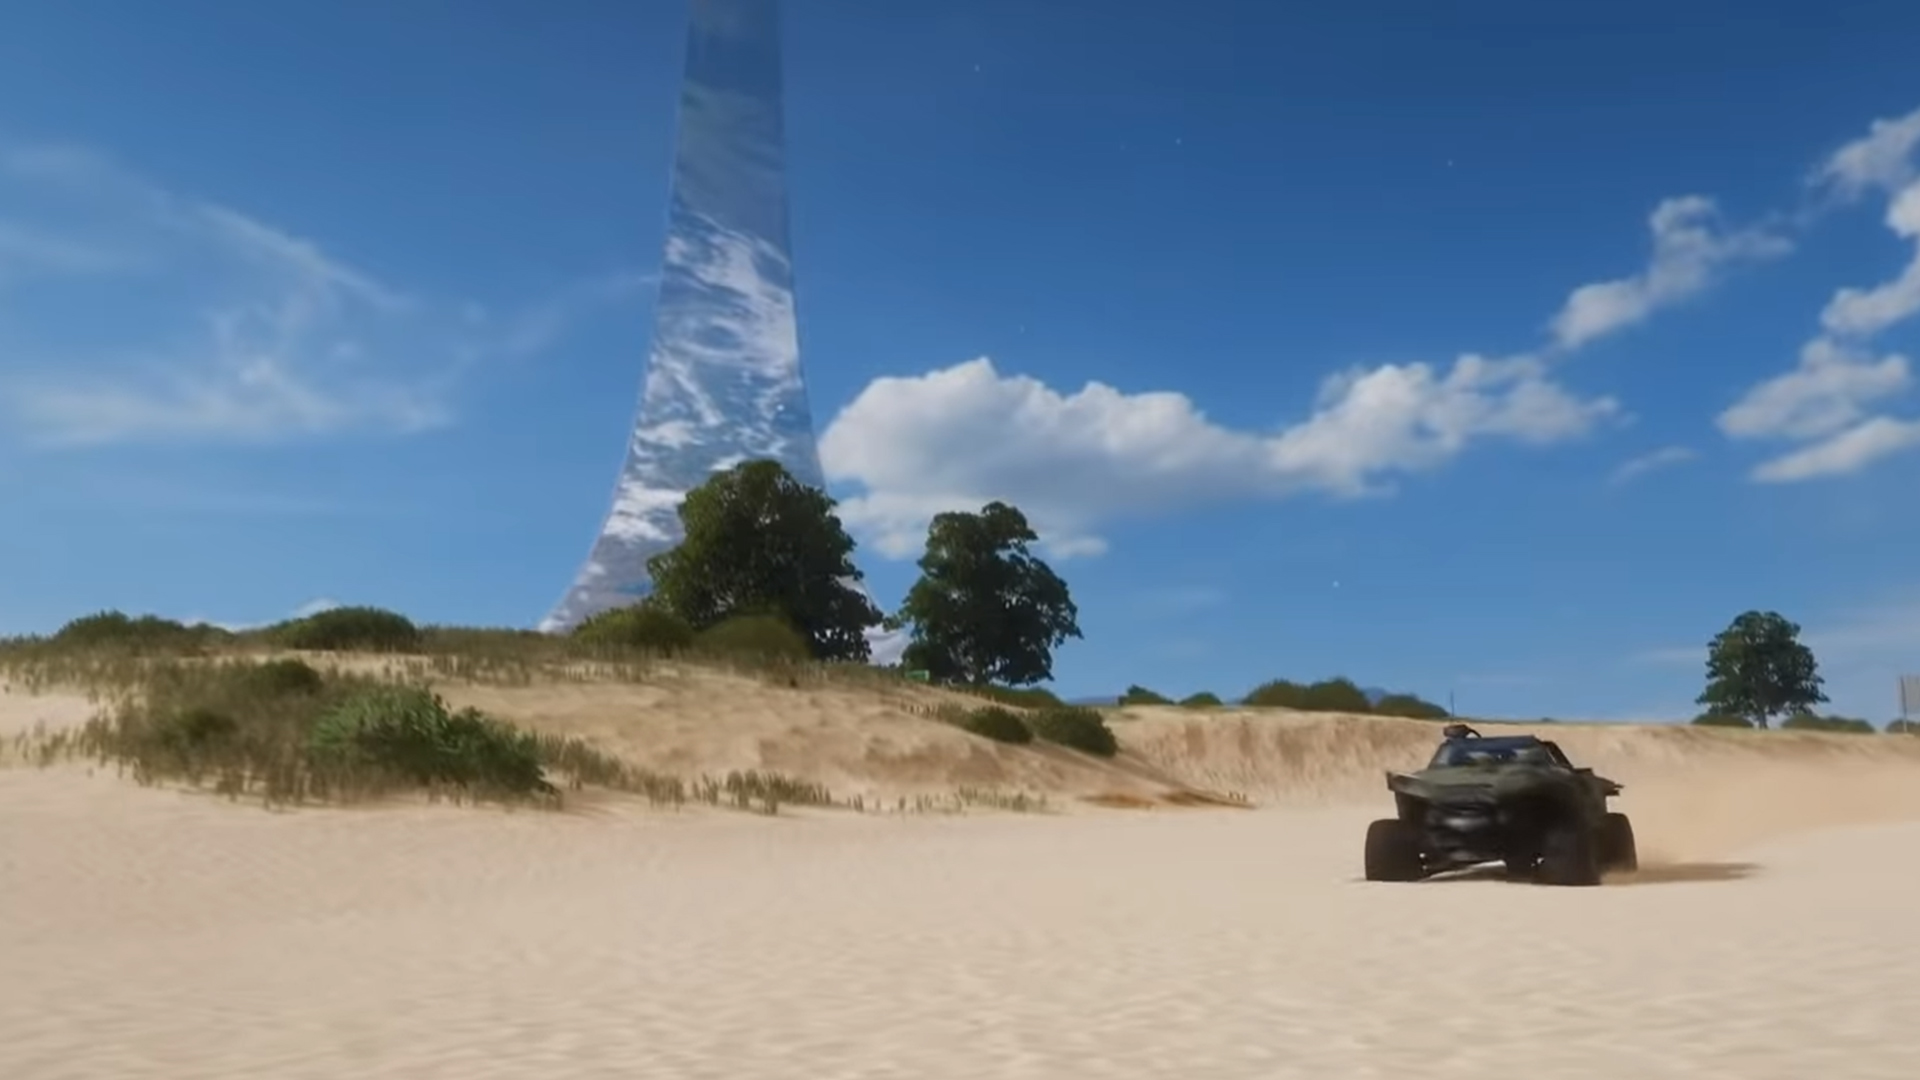 Forza Horizon 4 doesn’t just have a Warthog, it puts ... - 1920 x 1080 jpeg 507kB